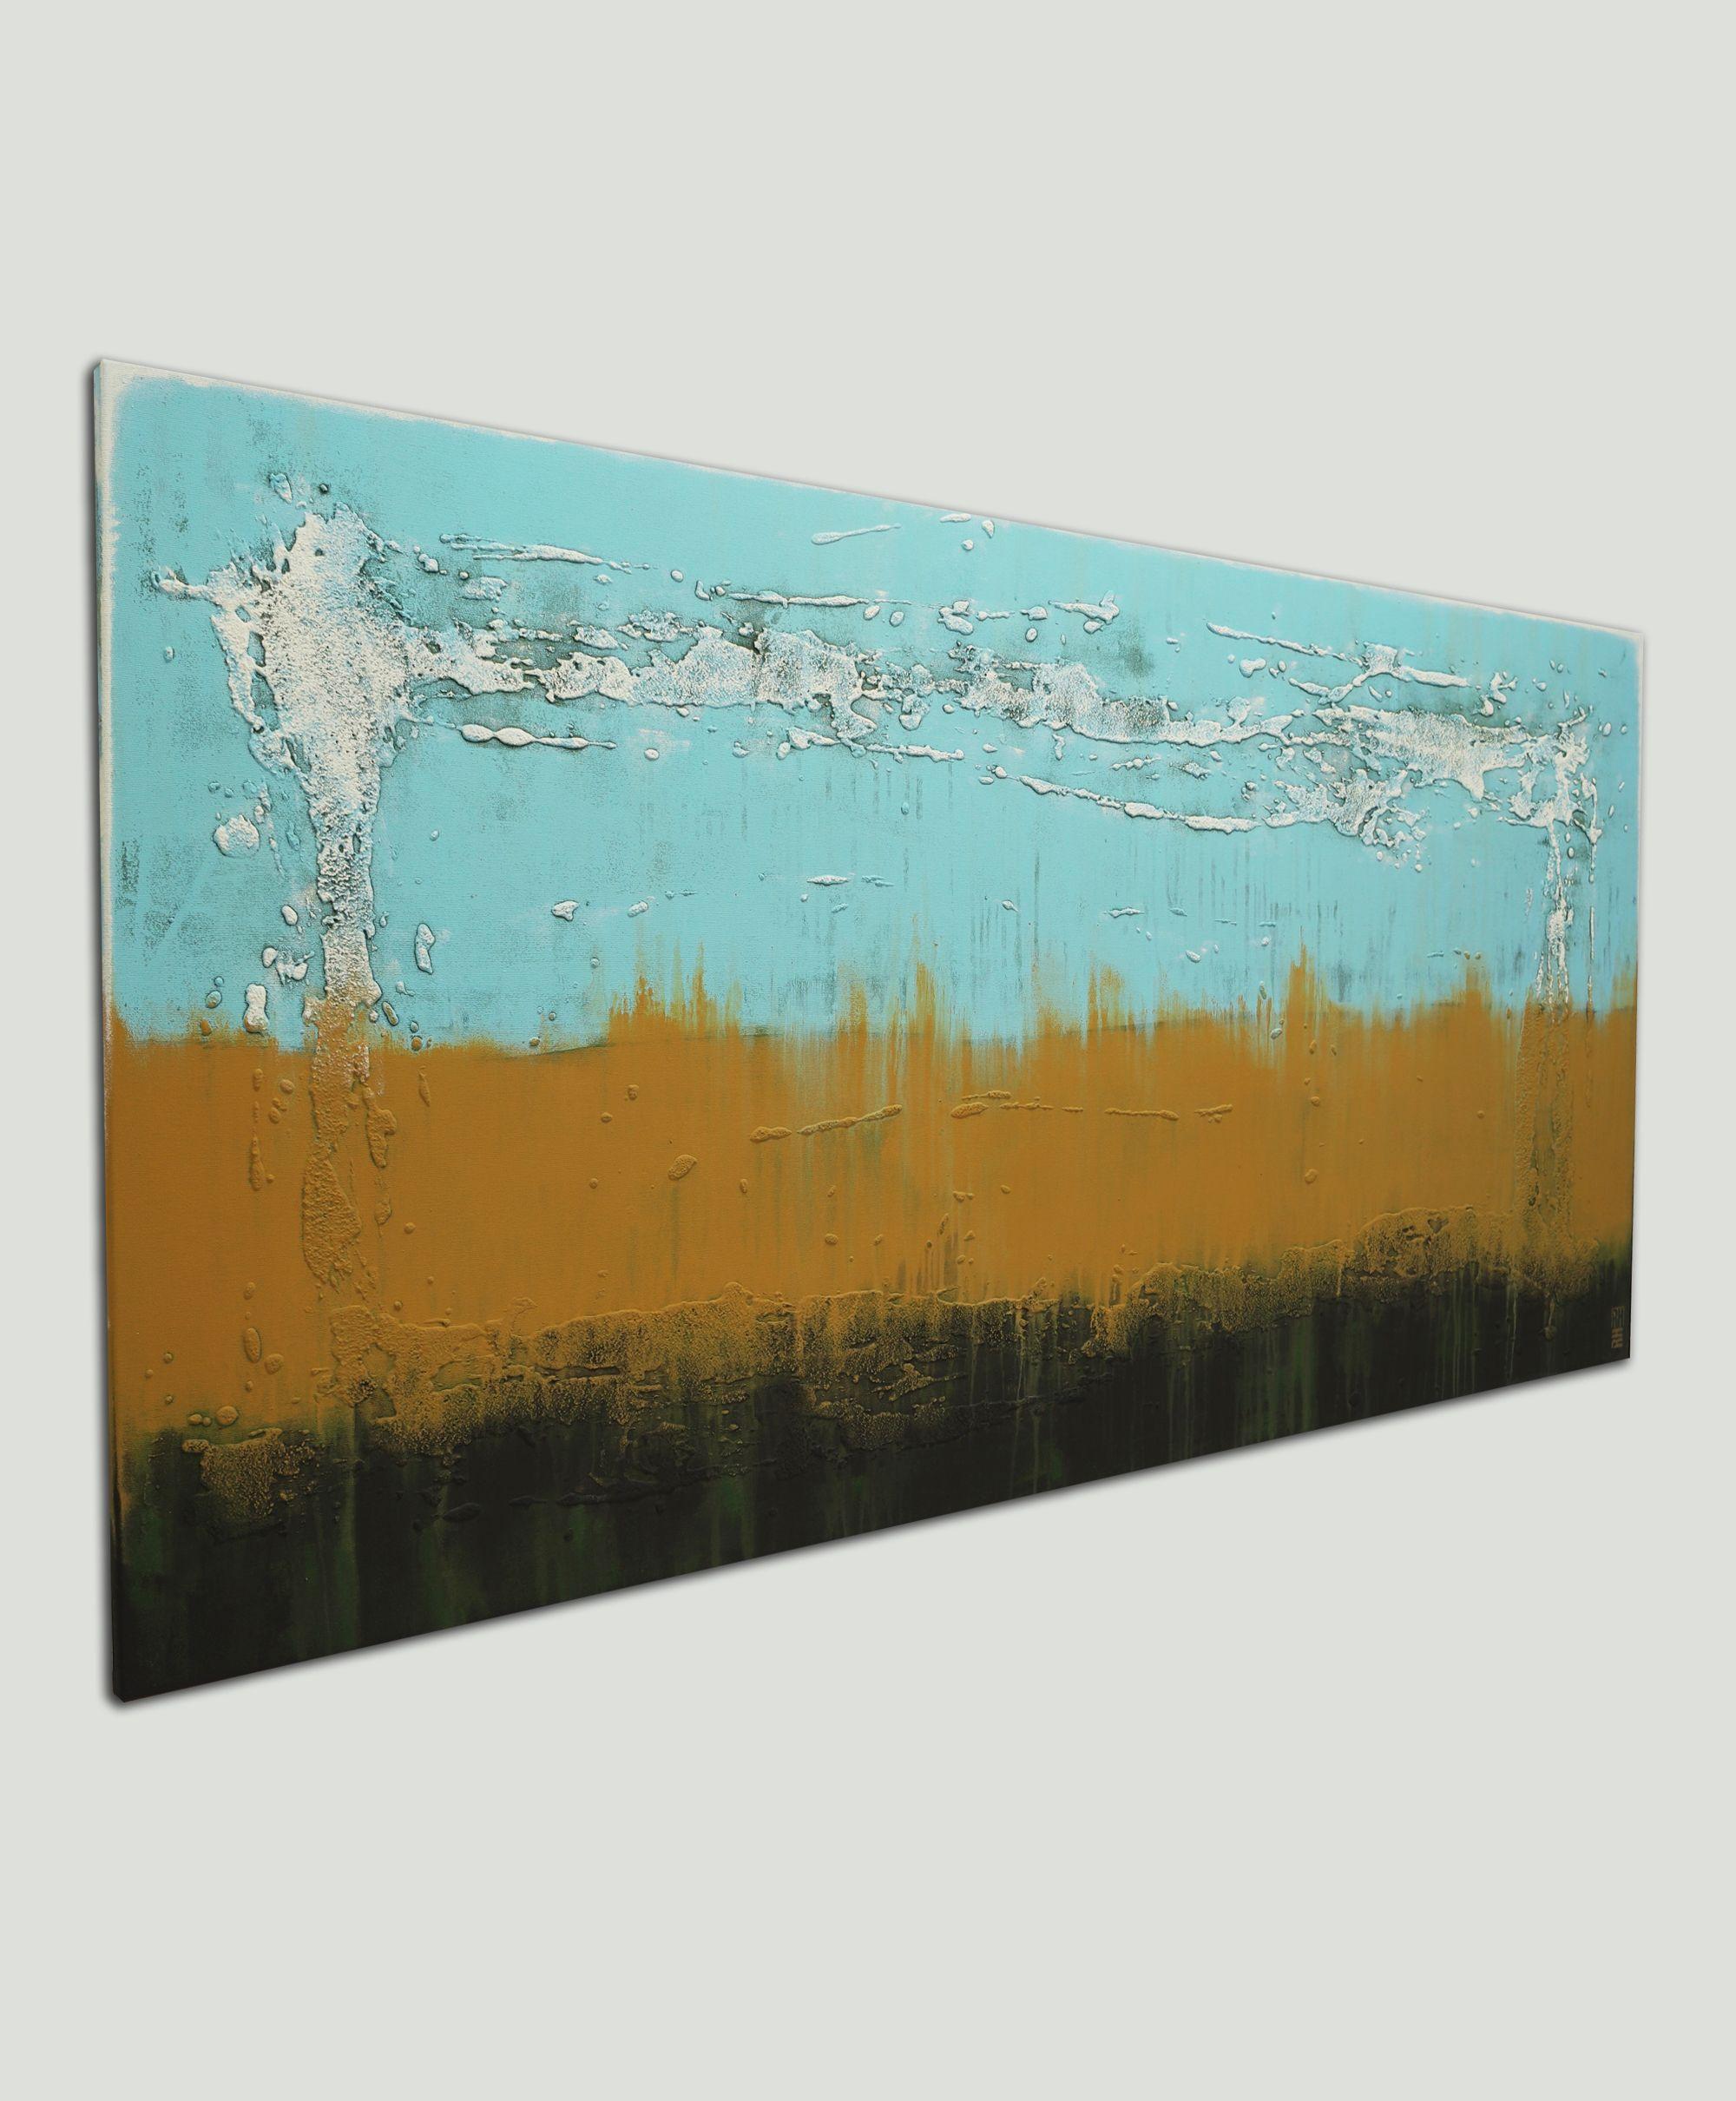 Extra Large Acrylic Abstract Painting, Original artwork created by Ronald Hunter.    An abstract composition of blue and brown shades, reminiscent of an open horizon. This abstract painting is made with many layers of acrylic paint, creating depth